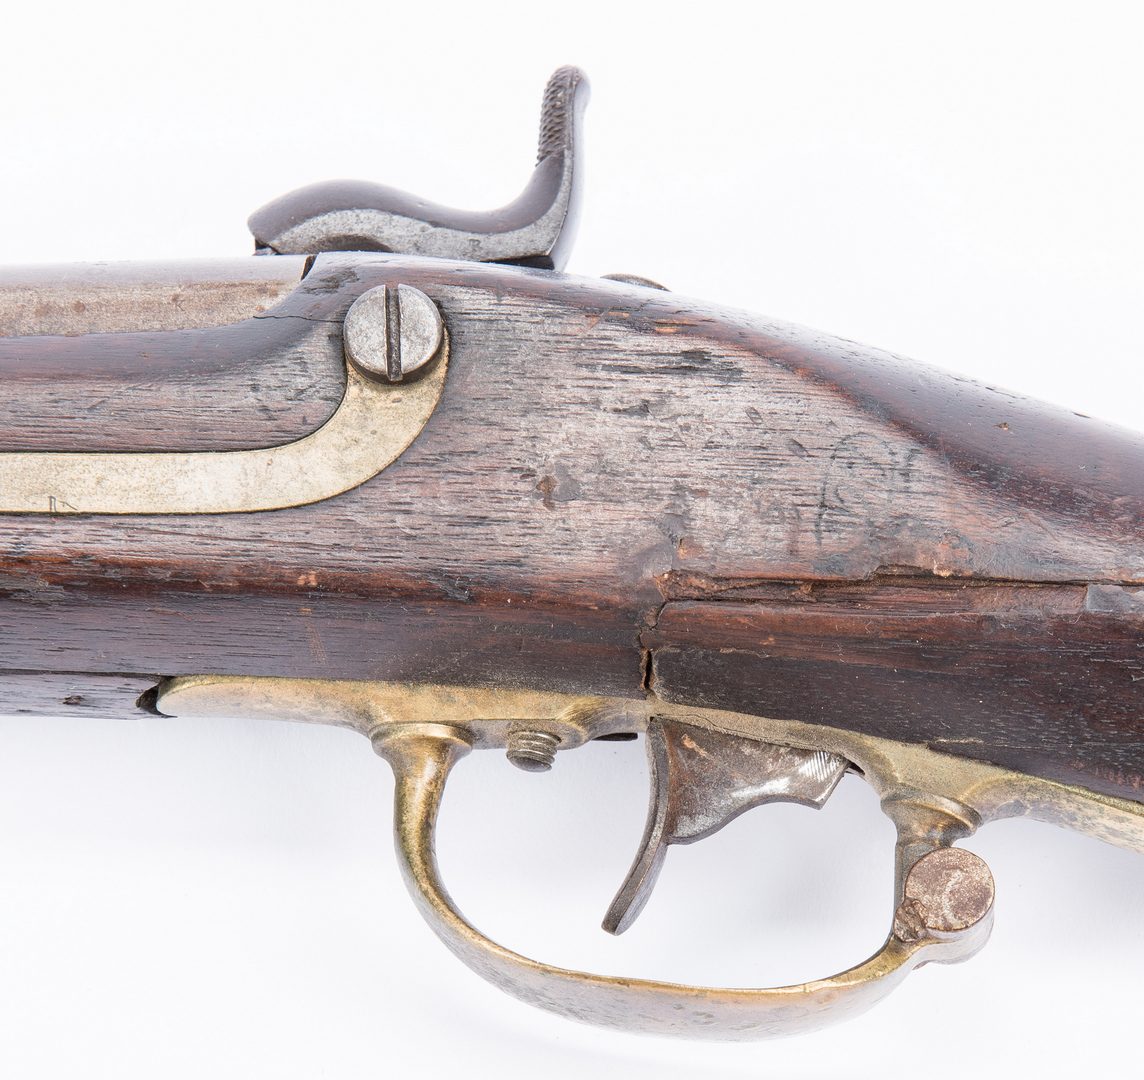 Lot 370: Model 1841 Windsor "Mississippi" Contract Rifle